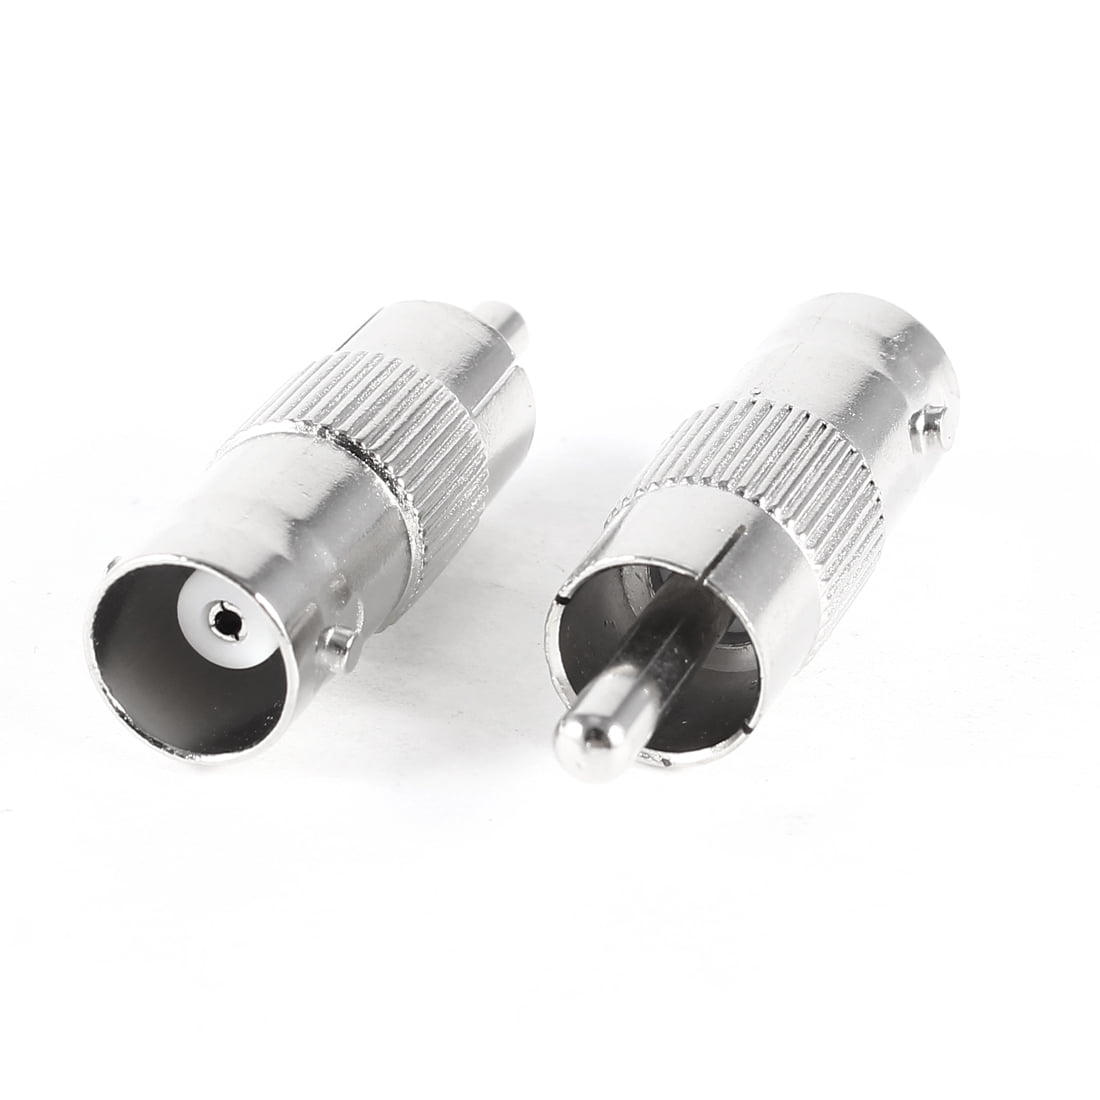 2X BNC Female To BNC Female Connector couplers Adapter For CCTV Video Camera 